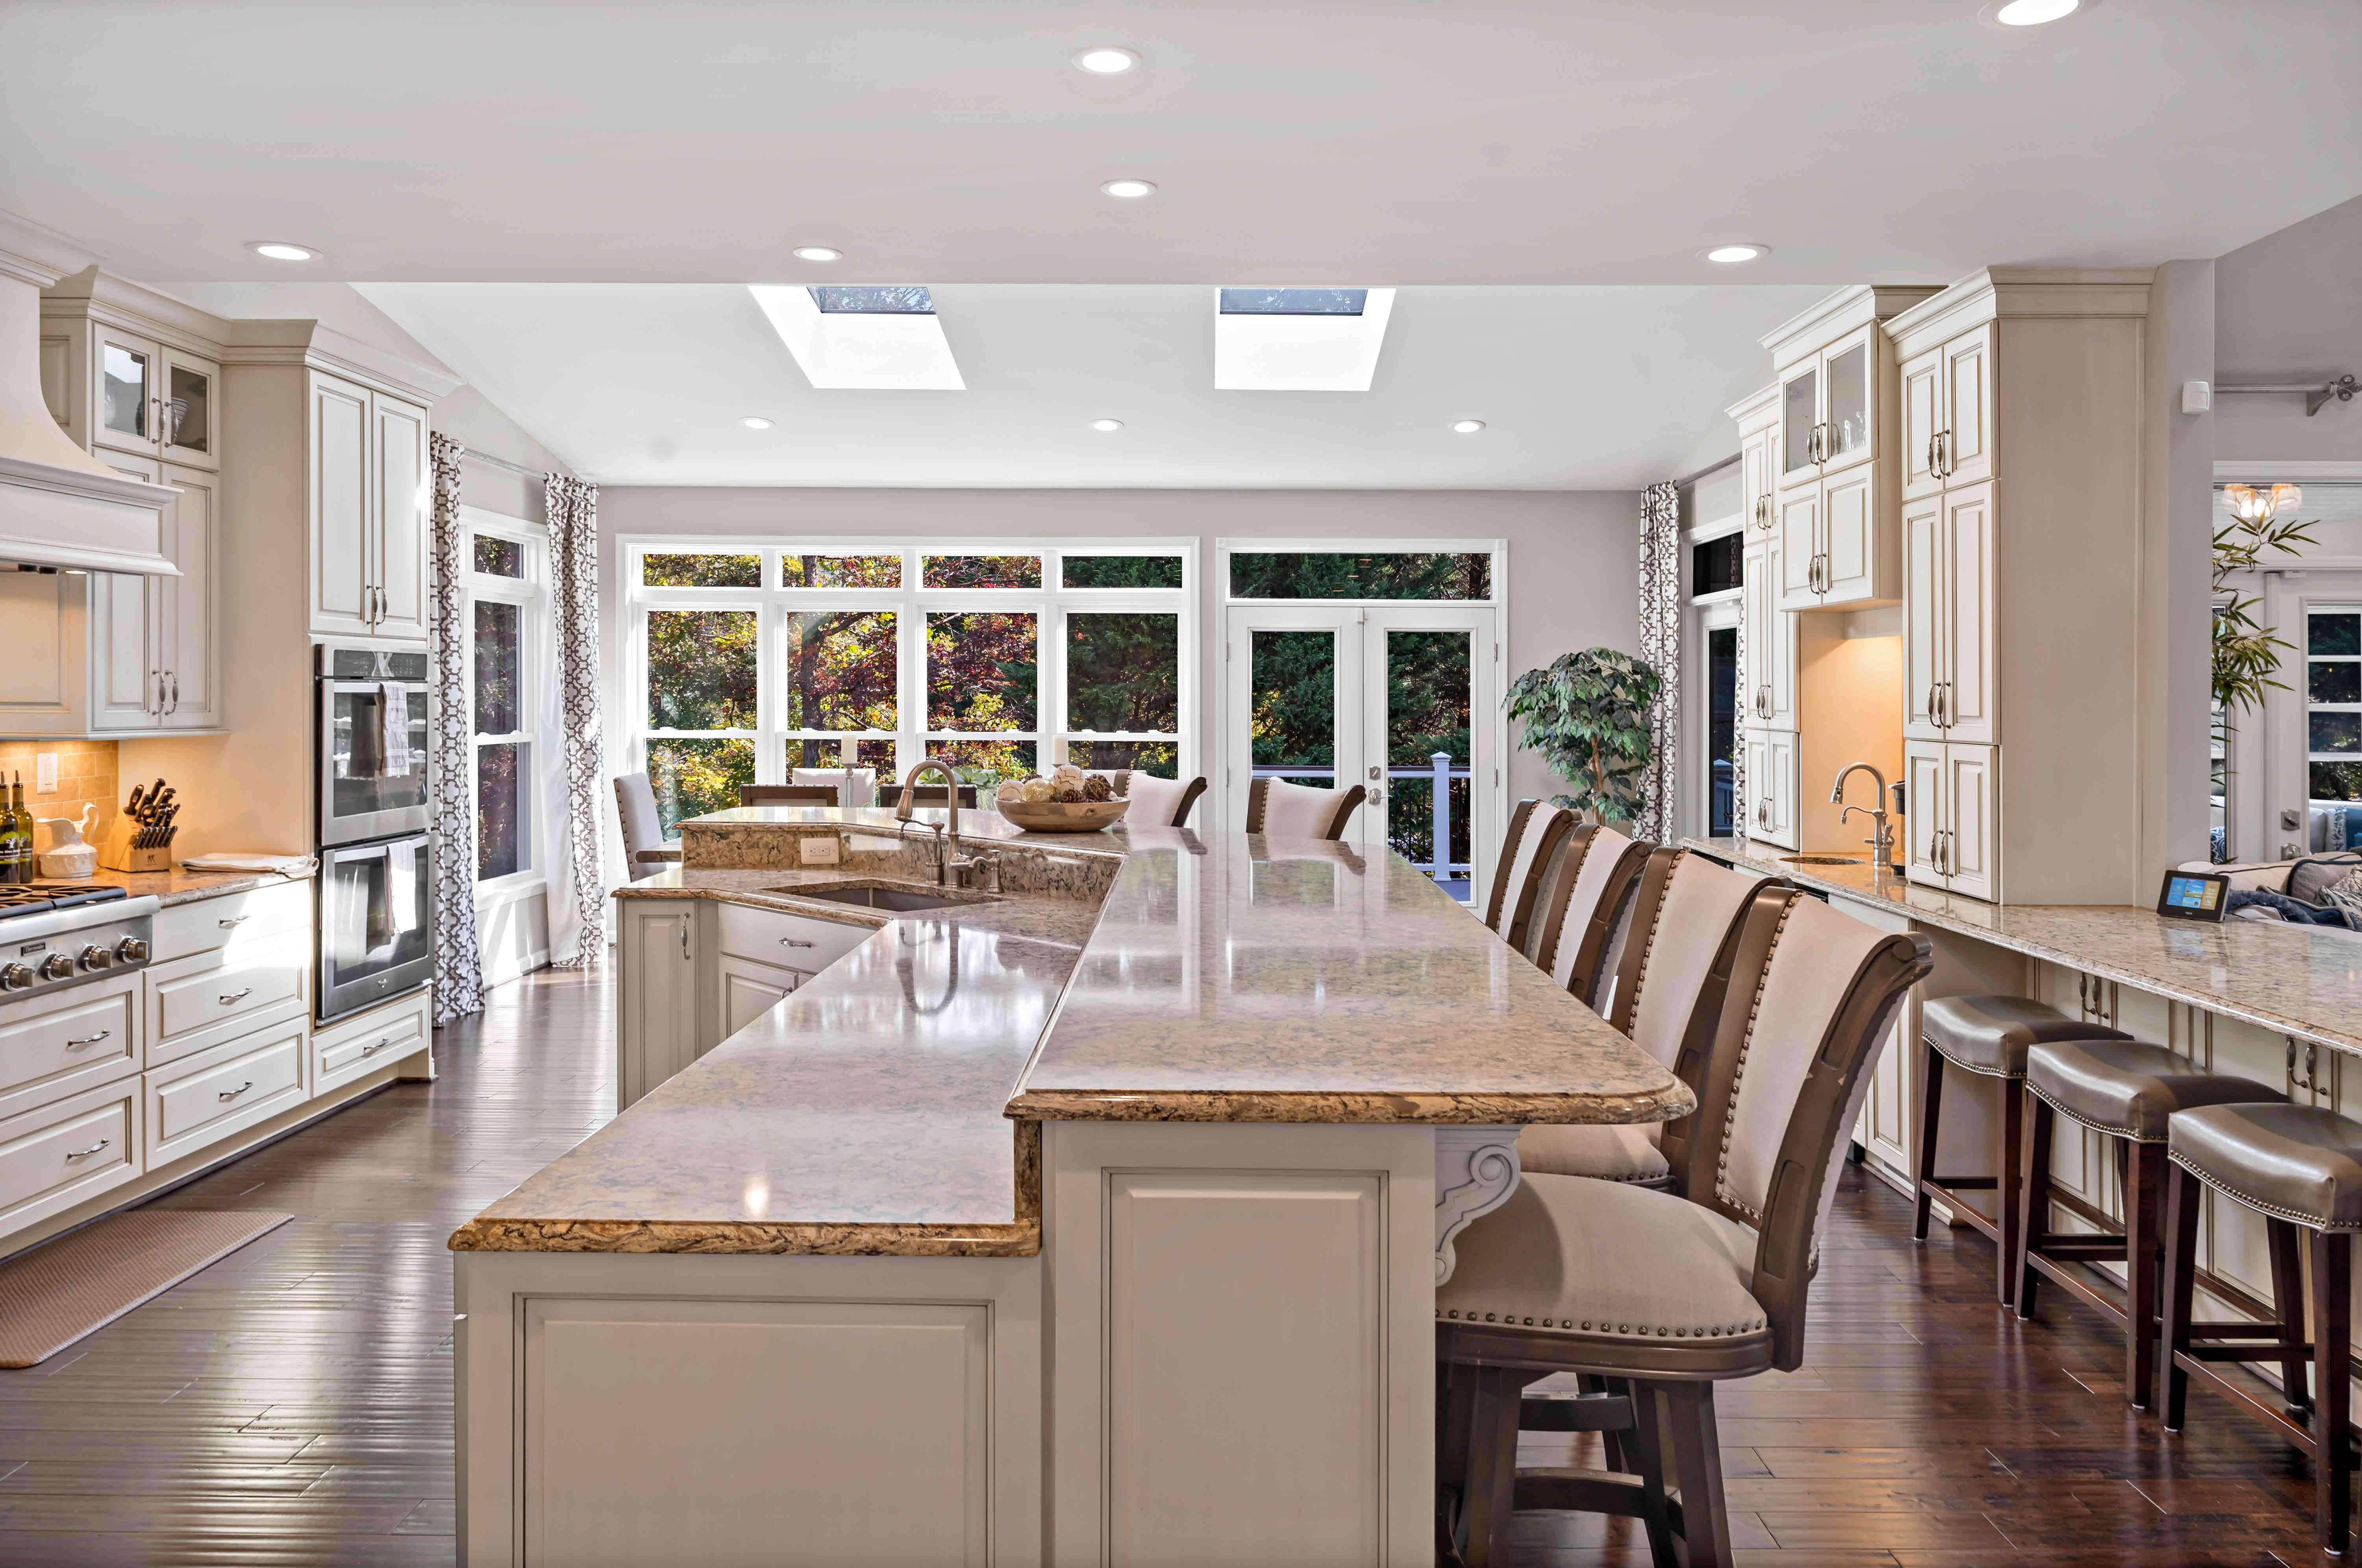 Two level kitchen island in cream colored Centreville kitchen